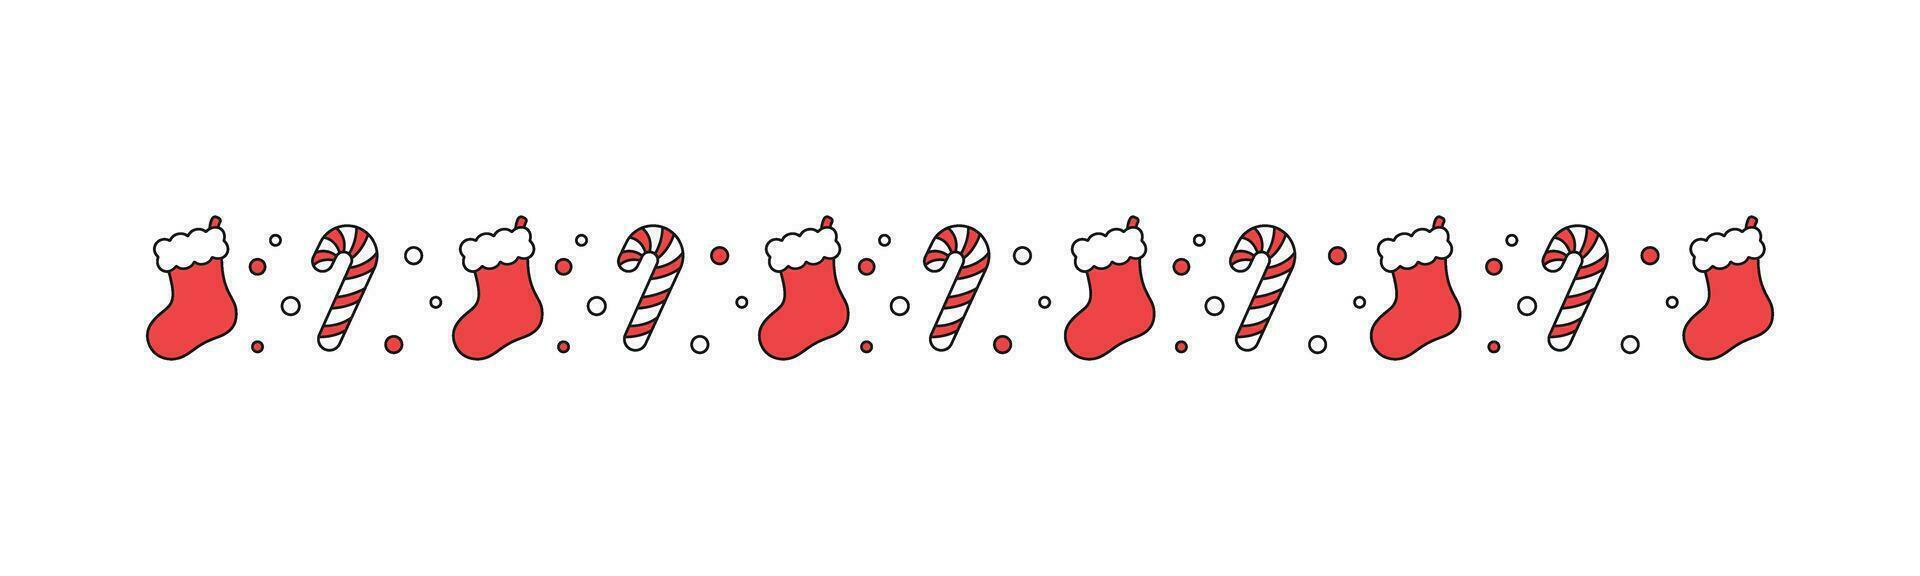 Christmas themed decorative border and text divider, Christmas Stocking and Candy Cane Pattern. Vector Illustration.